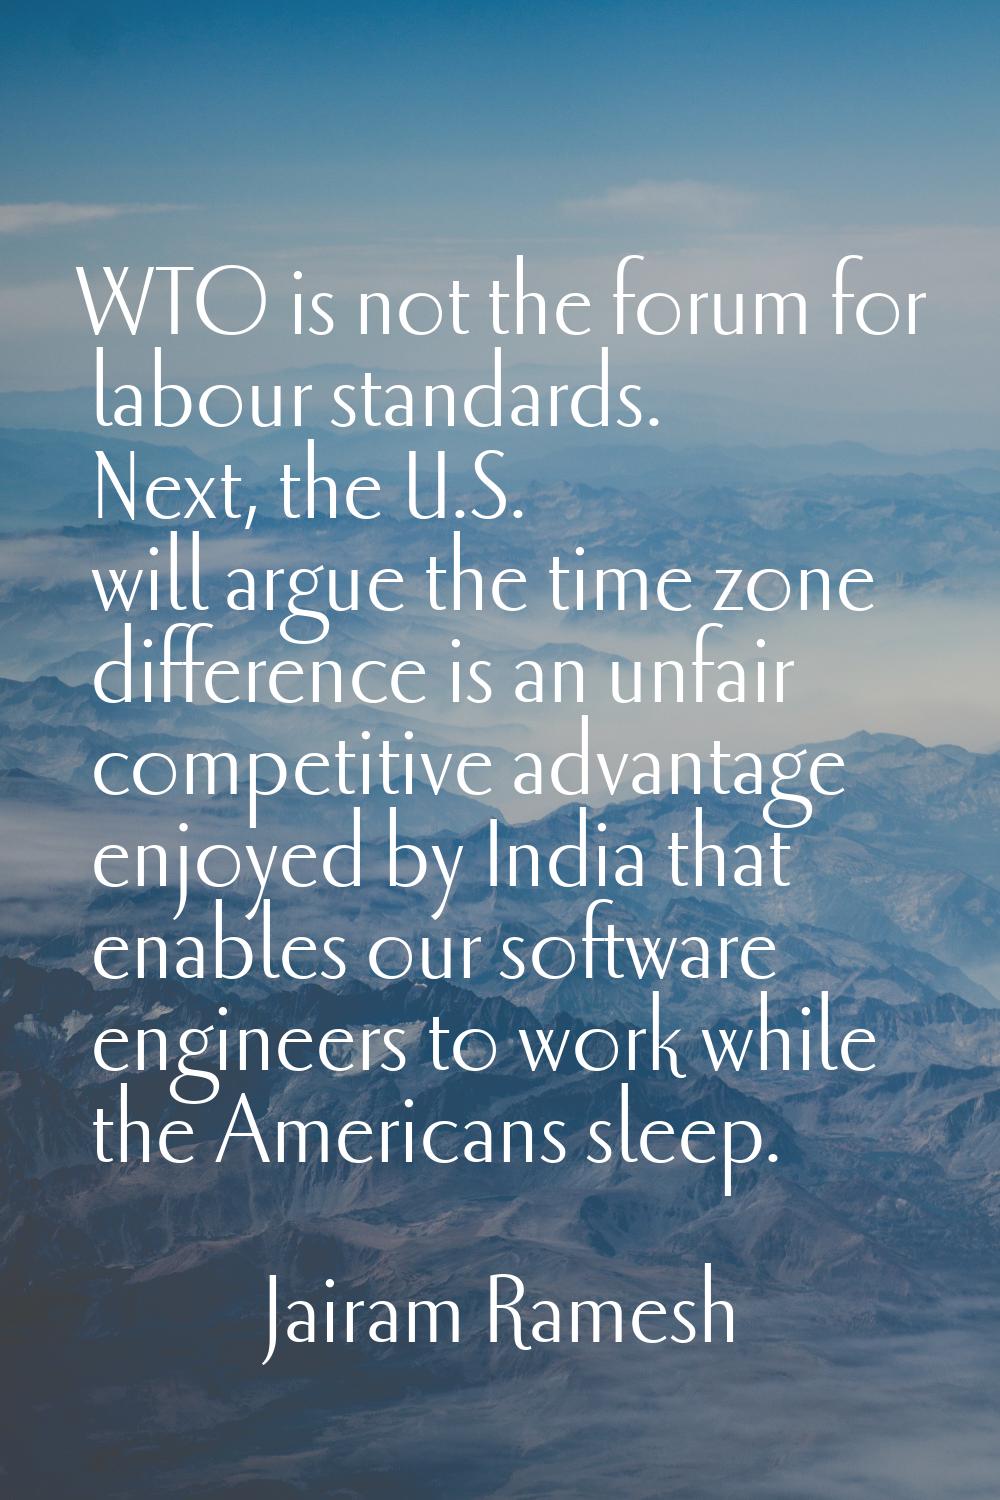 WTO is not the forum for labour standards. Next, the U.S. will argue the time zone difference is an